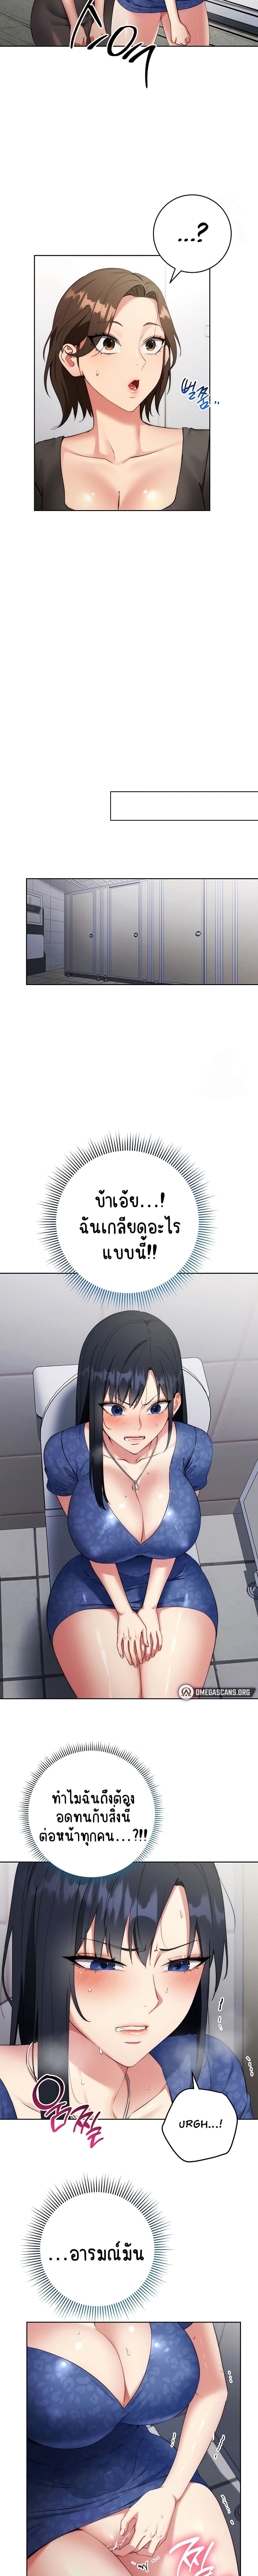 Outsider: The Invisible Man ตอนที่ 5 ภาพ 14